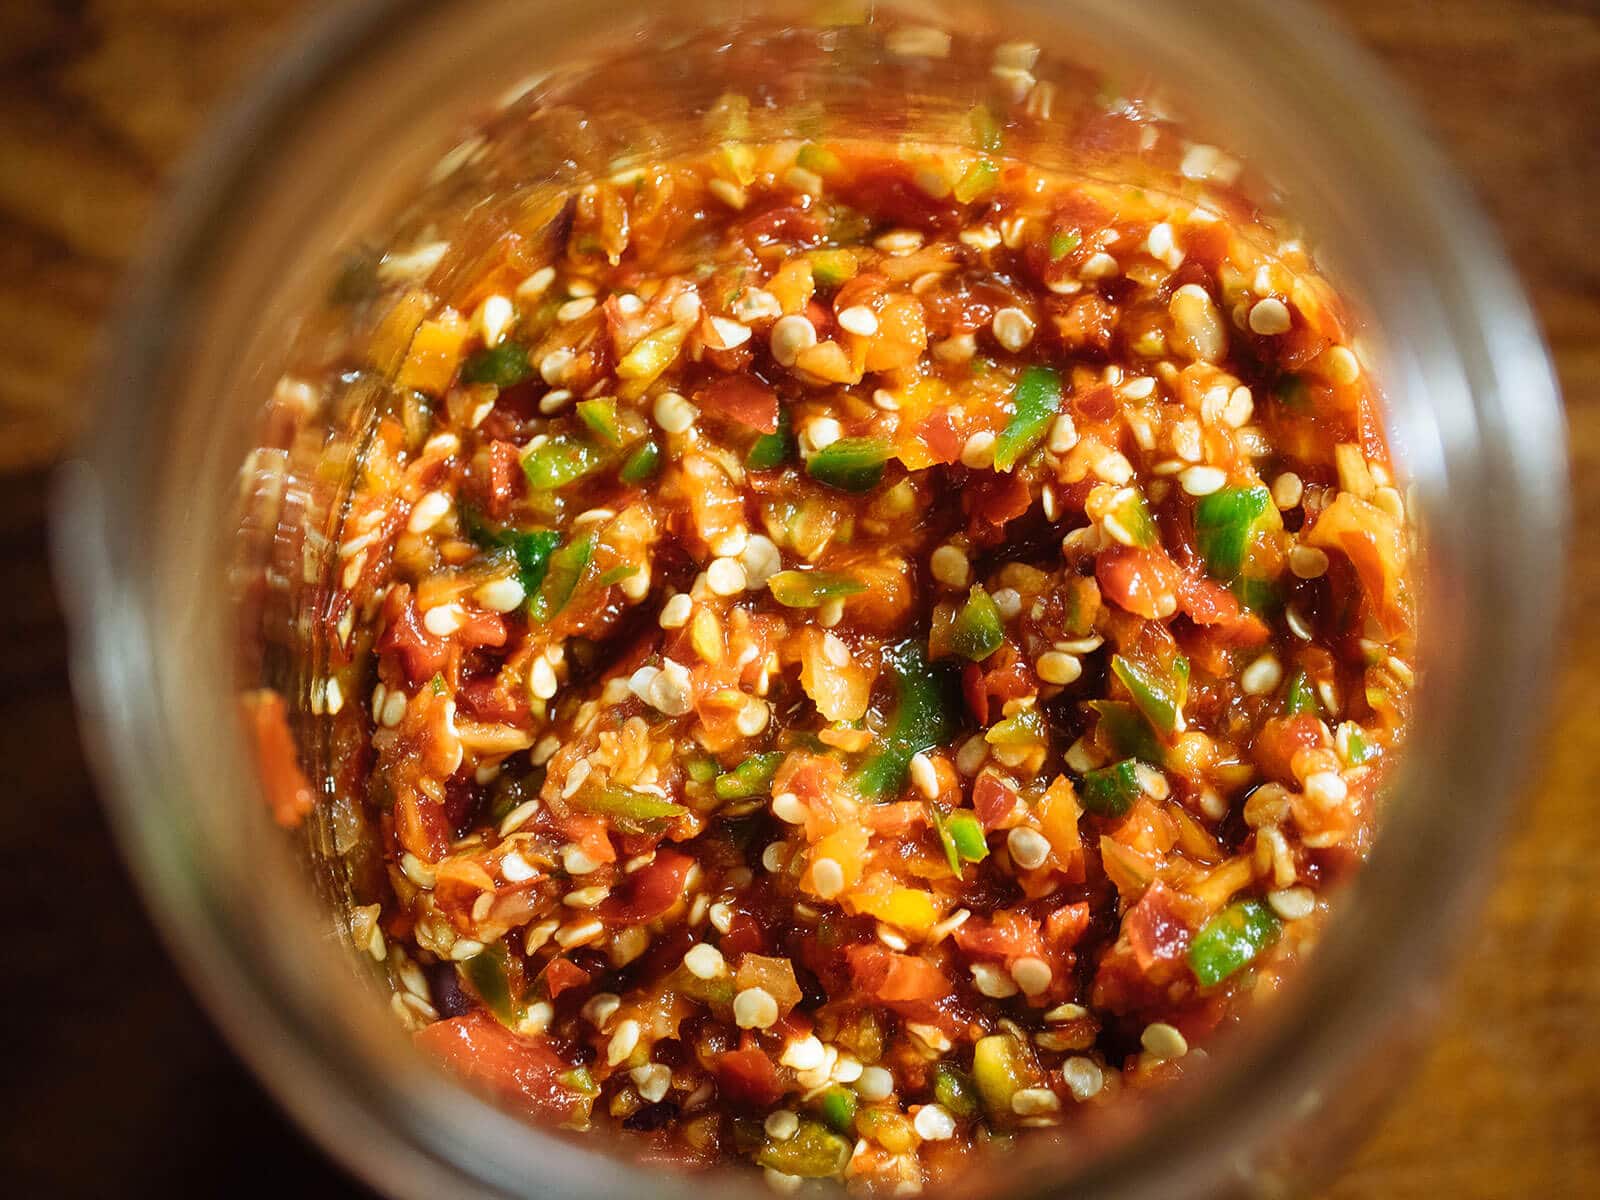 Aerial view of hot chile pepper mash in a jar